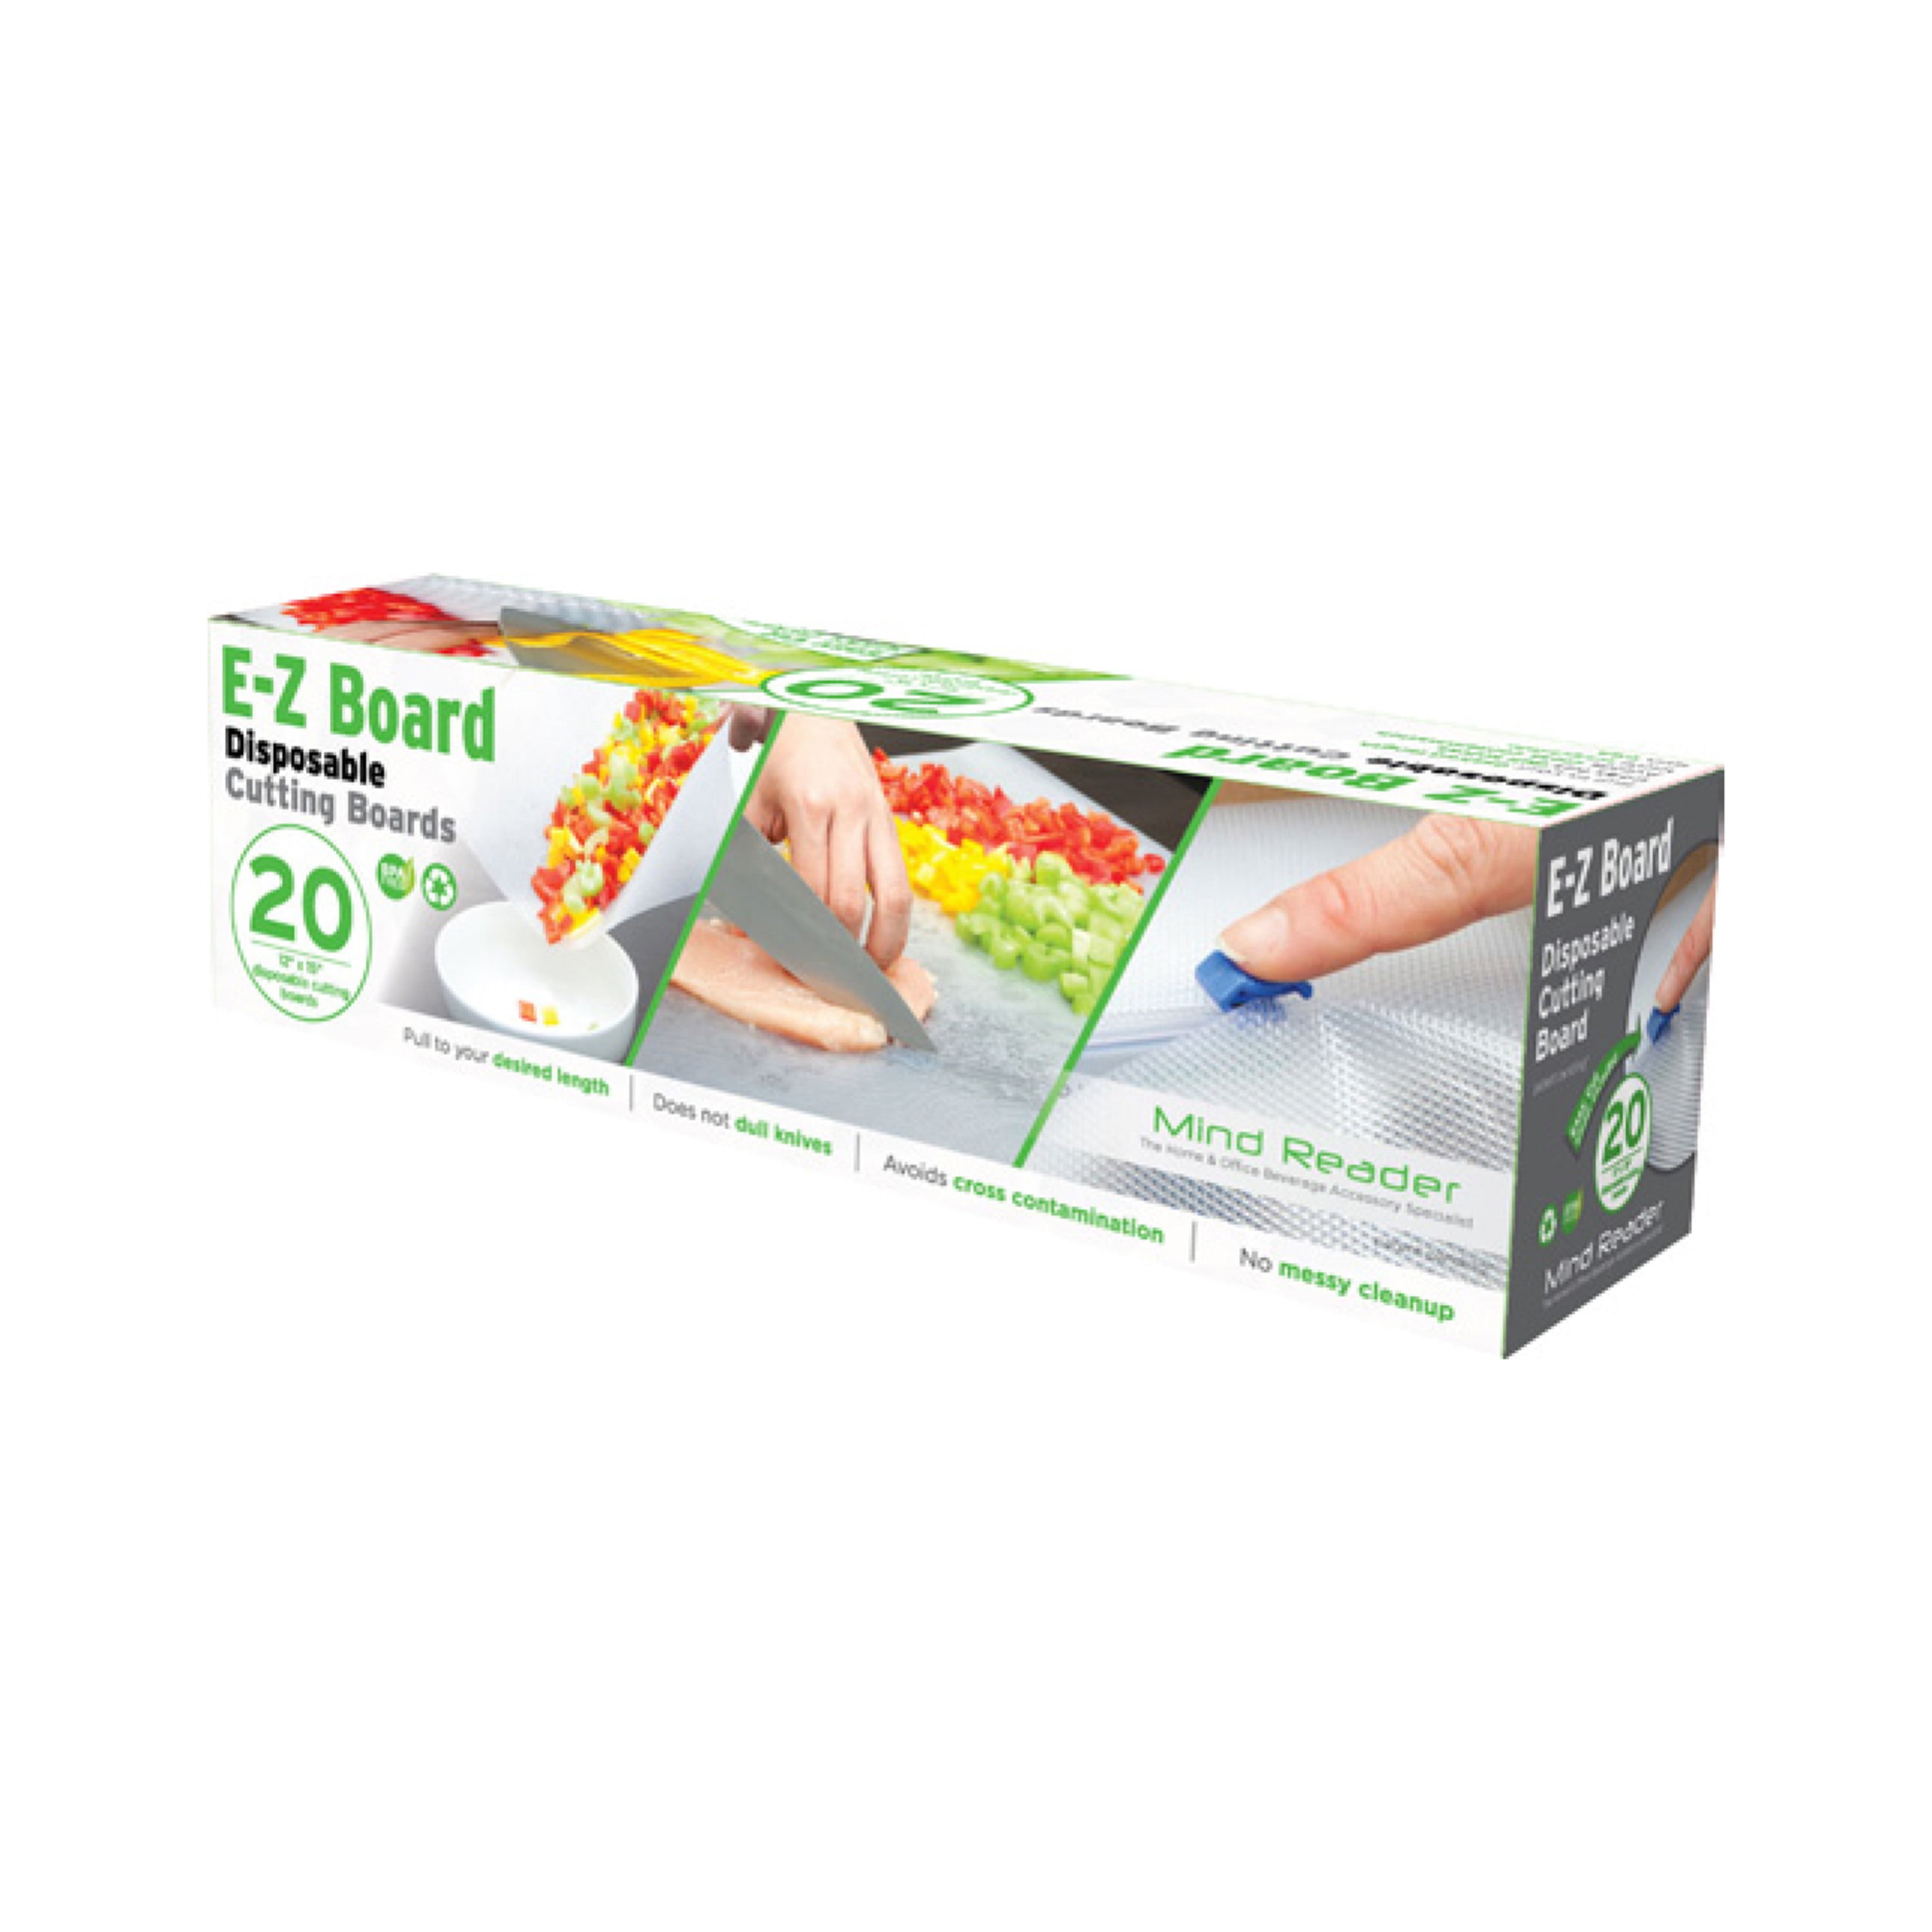 Mind Reader E-Z Board Disposable Cutting Boards, 25 Sq. ft., Clear